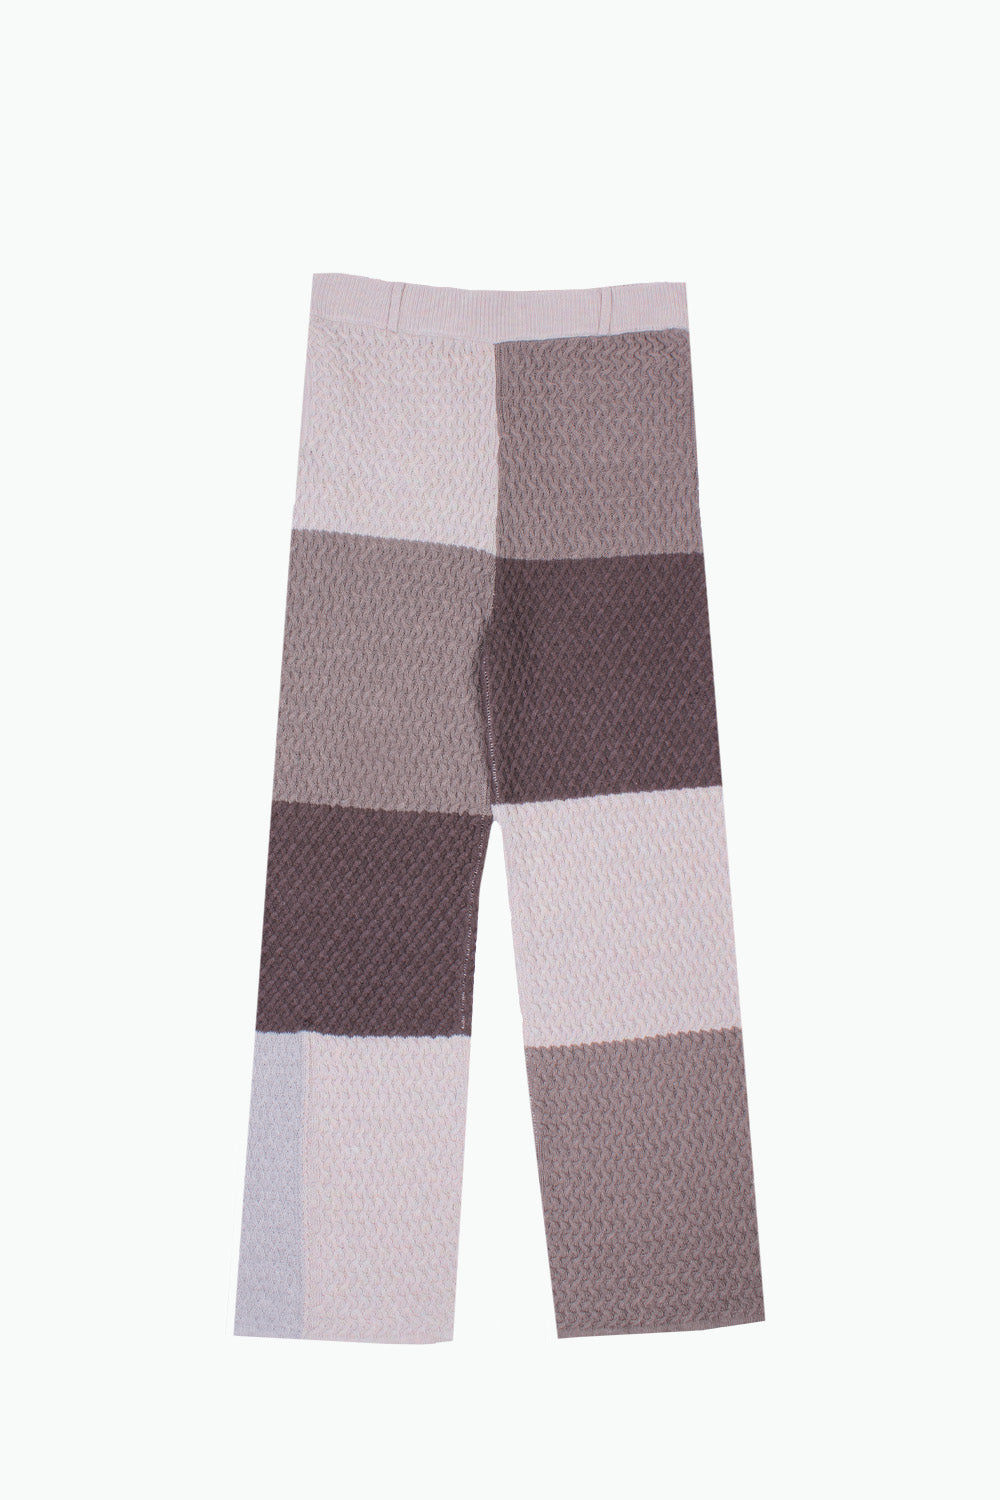 Greyscale Color-block Knit Pants